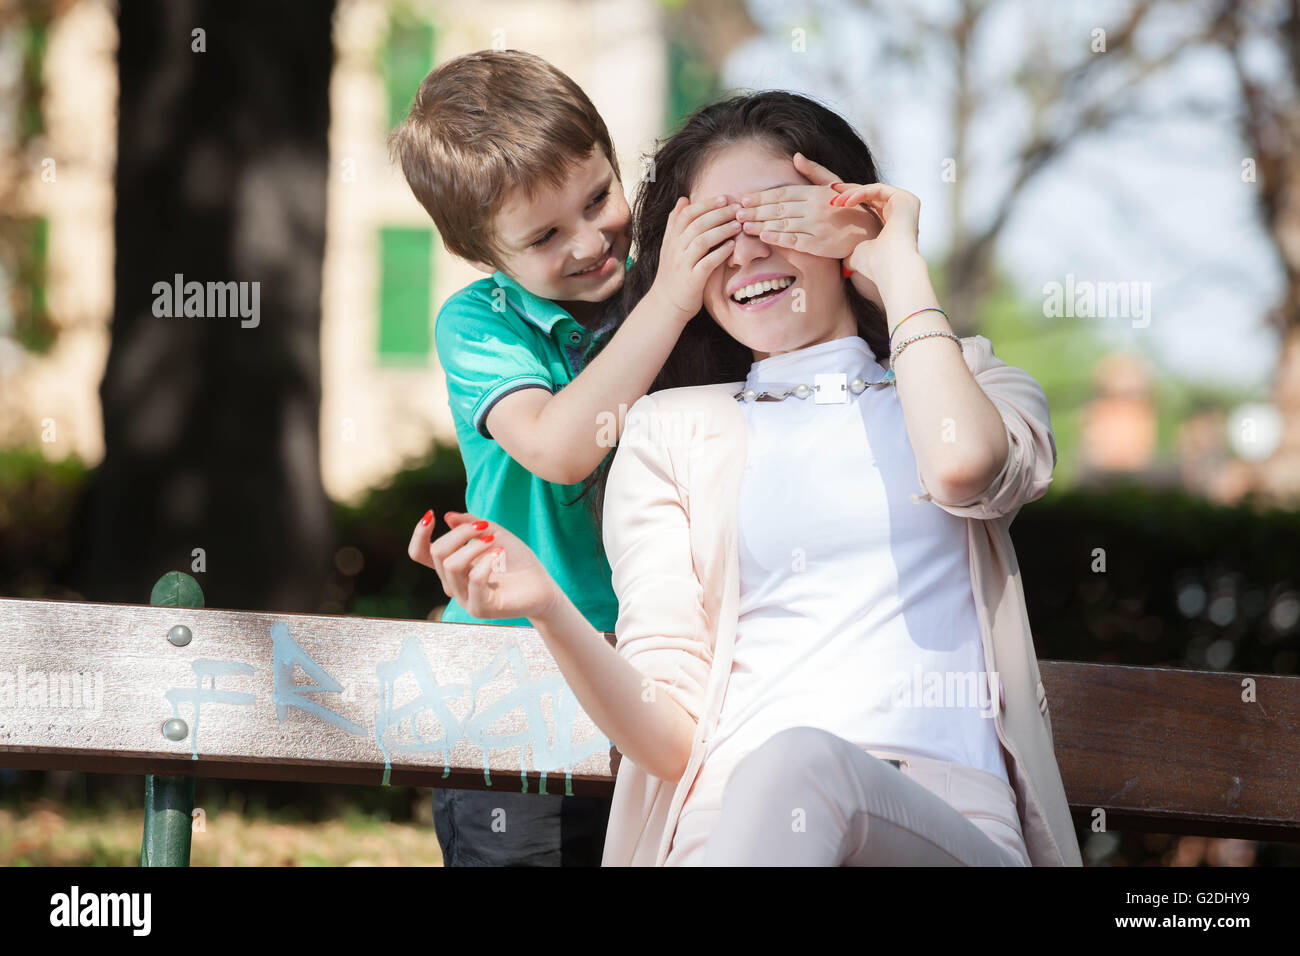 kid boy playing in the park guess who with his young mom or aunt Stock Photo